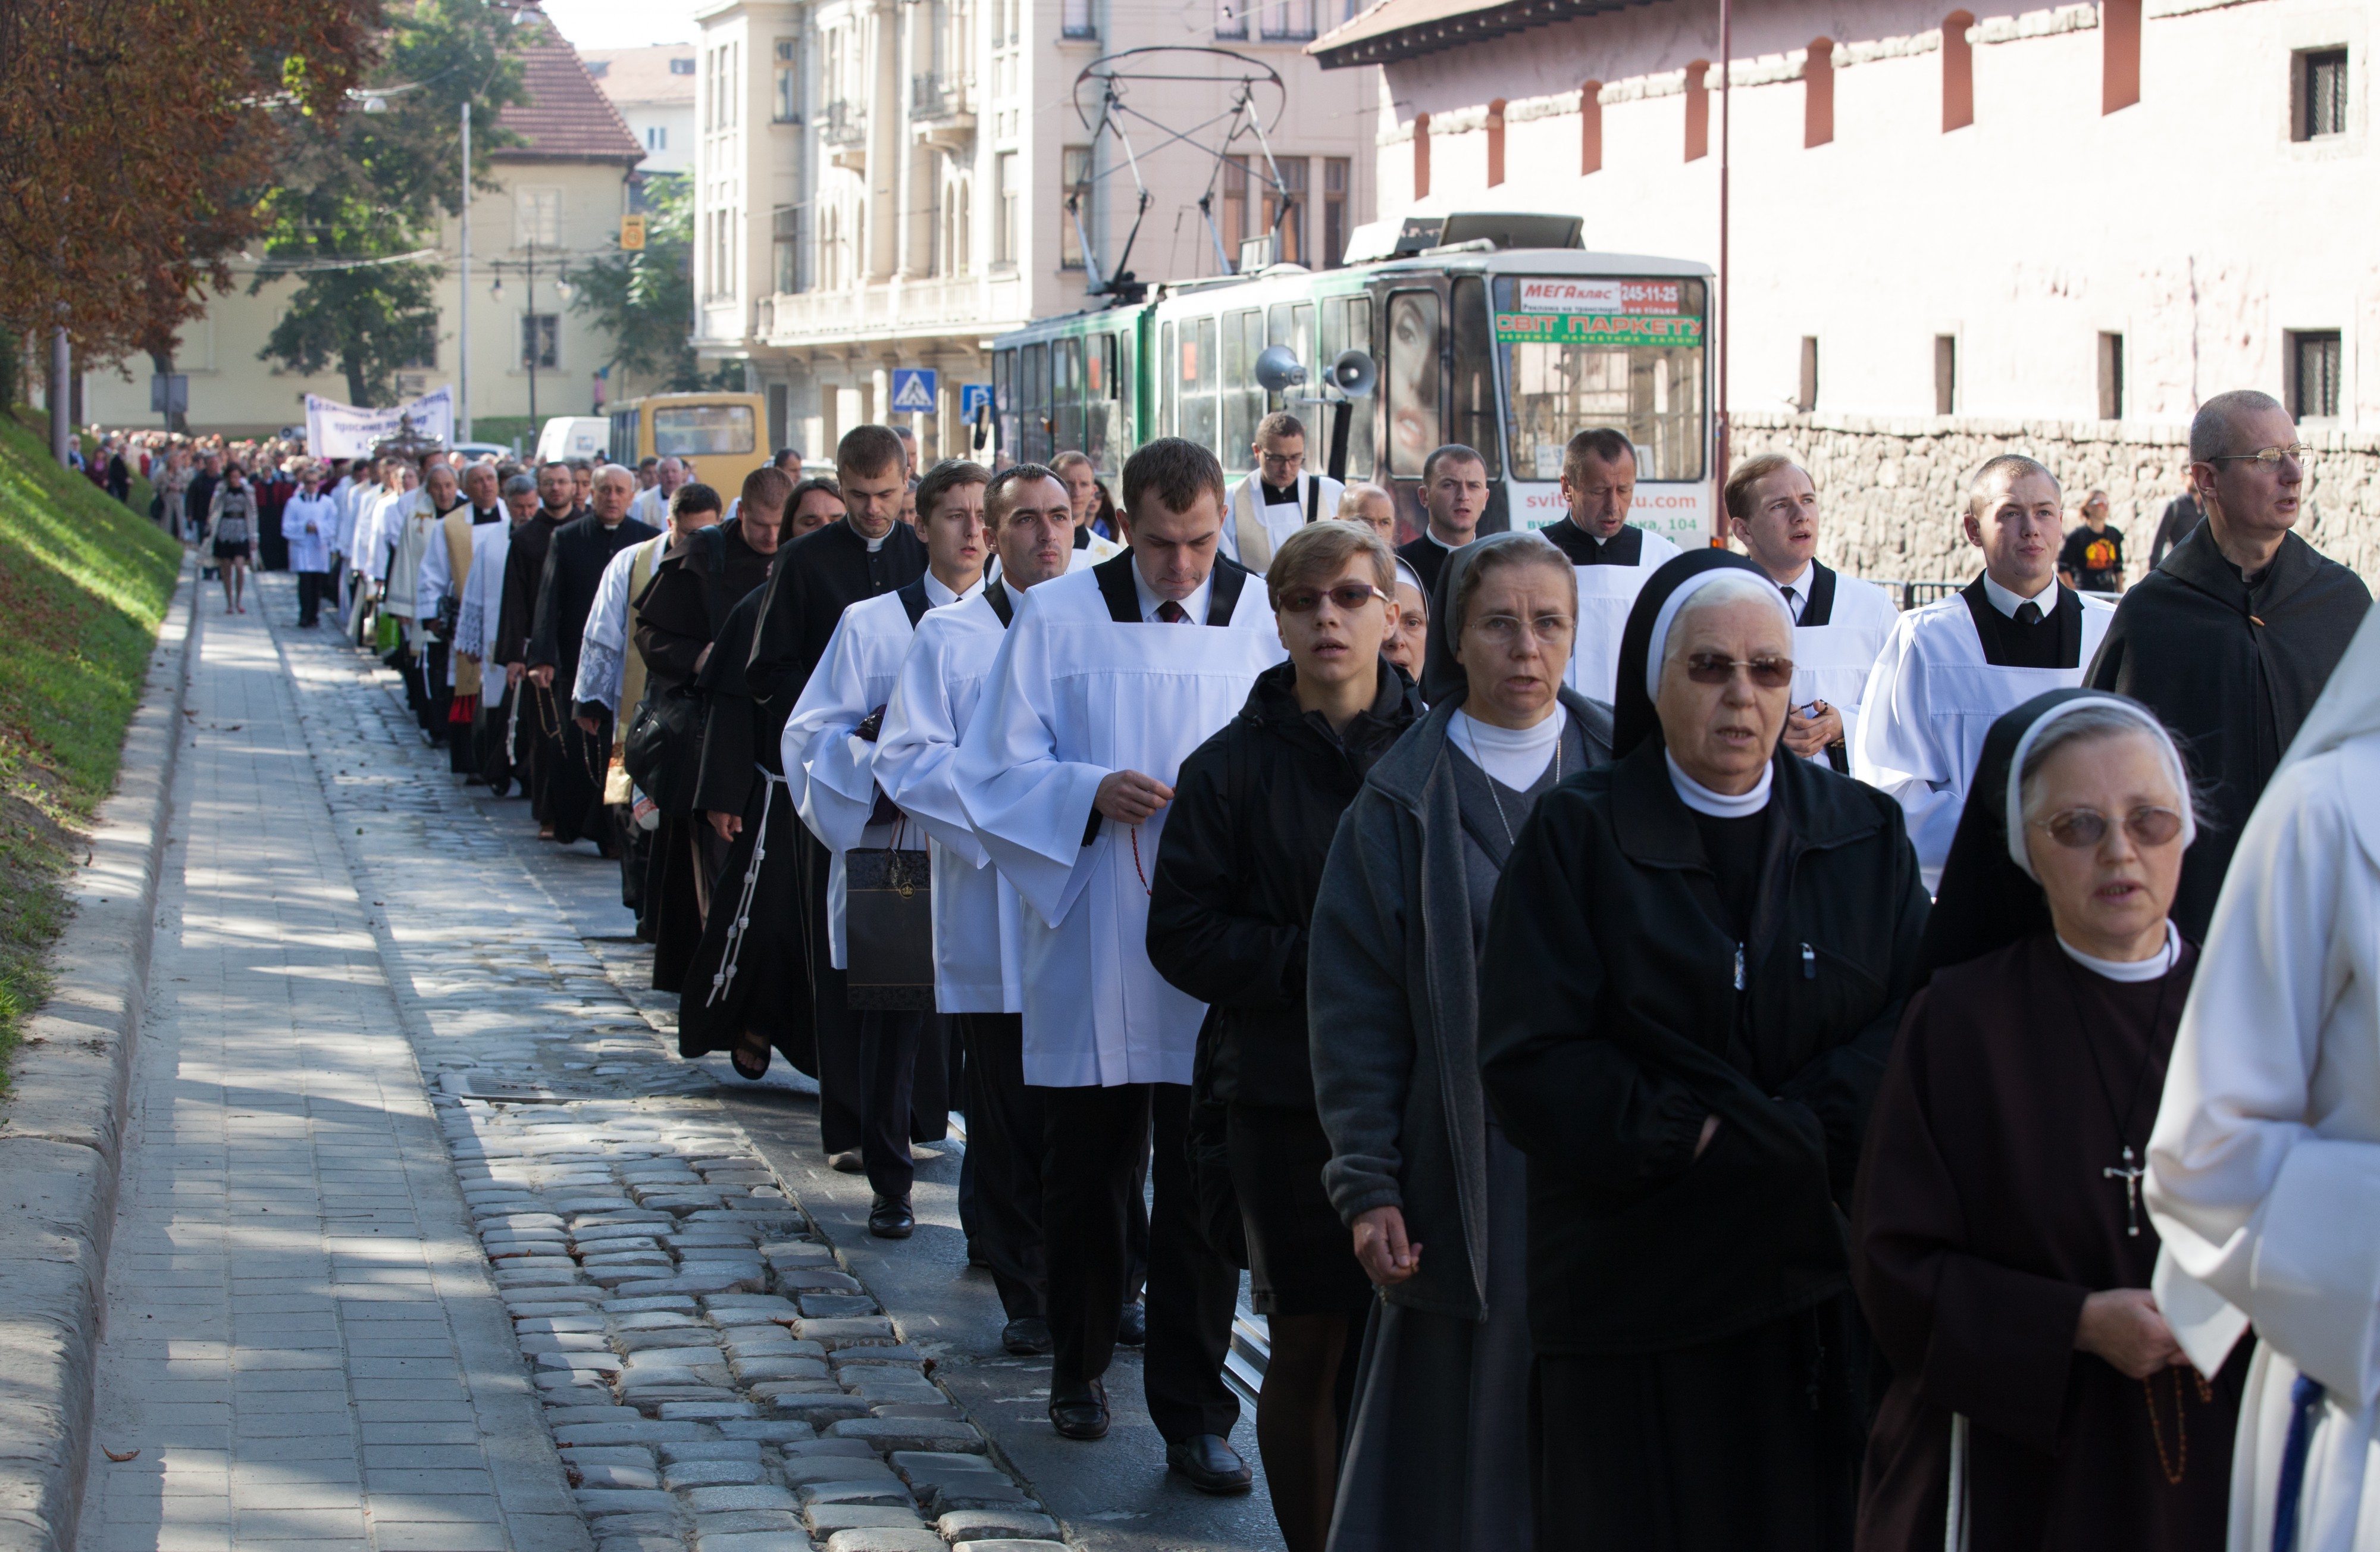 a Catholic procession in Lviv, Ukraine in September 2014, picture 4